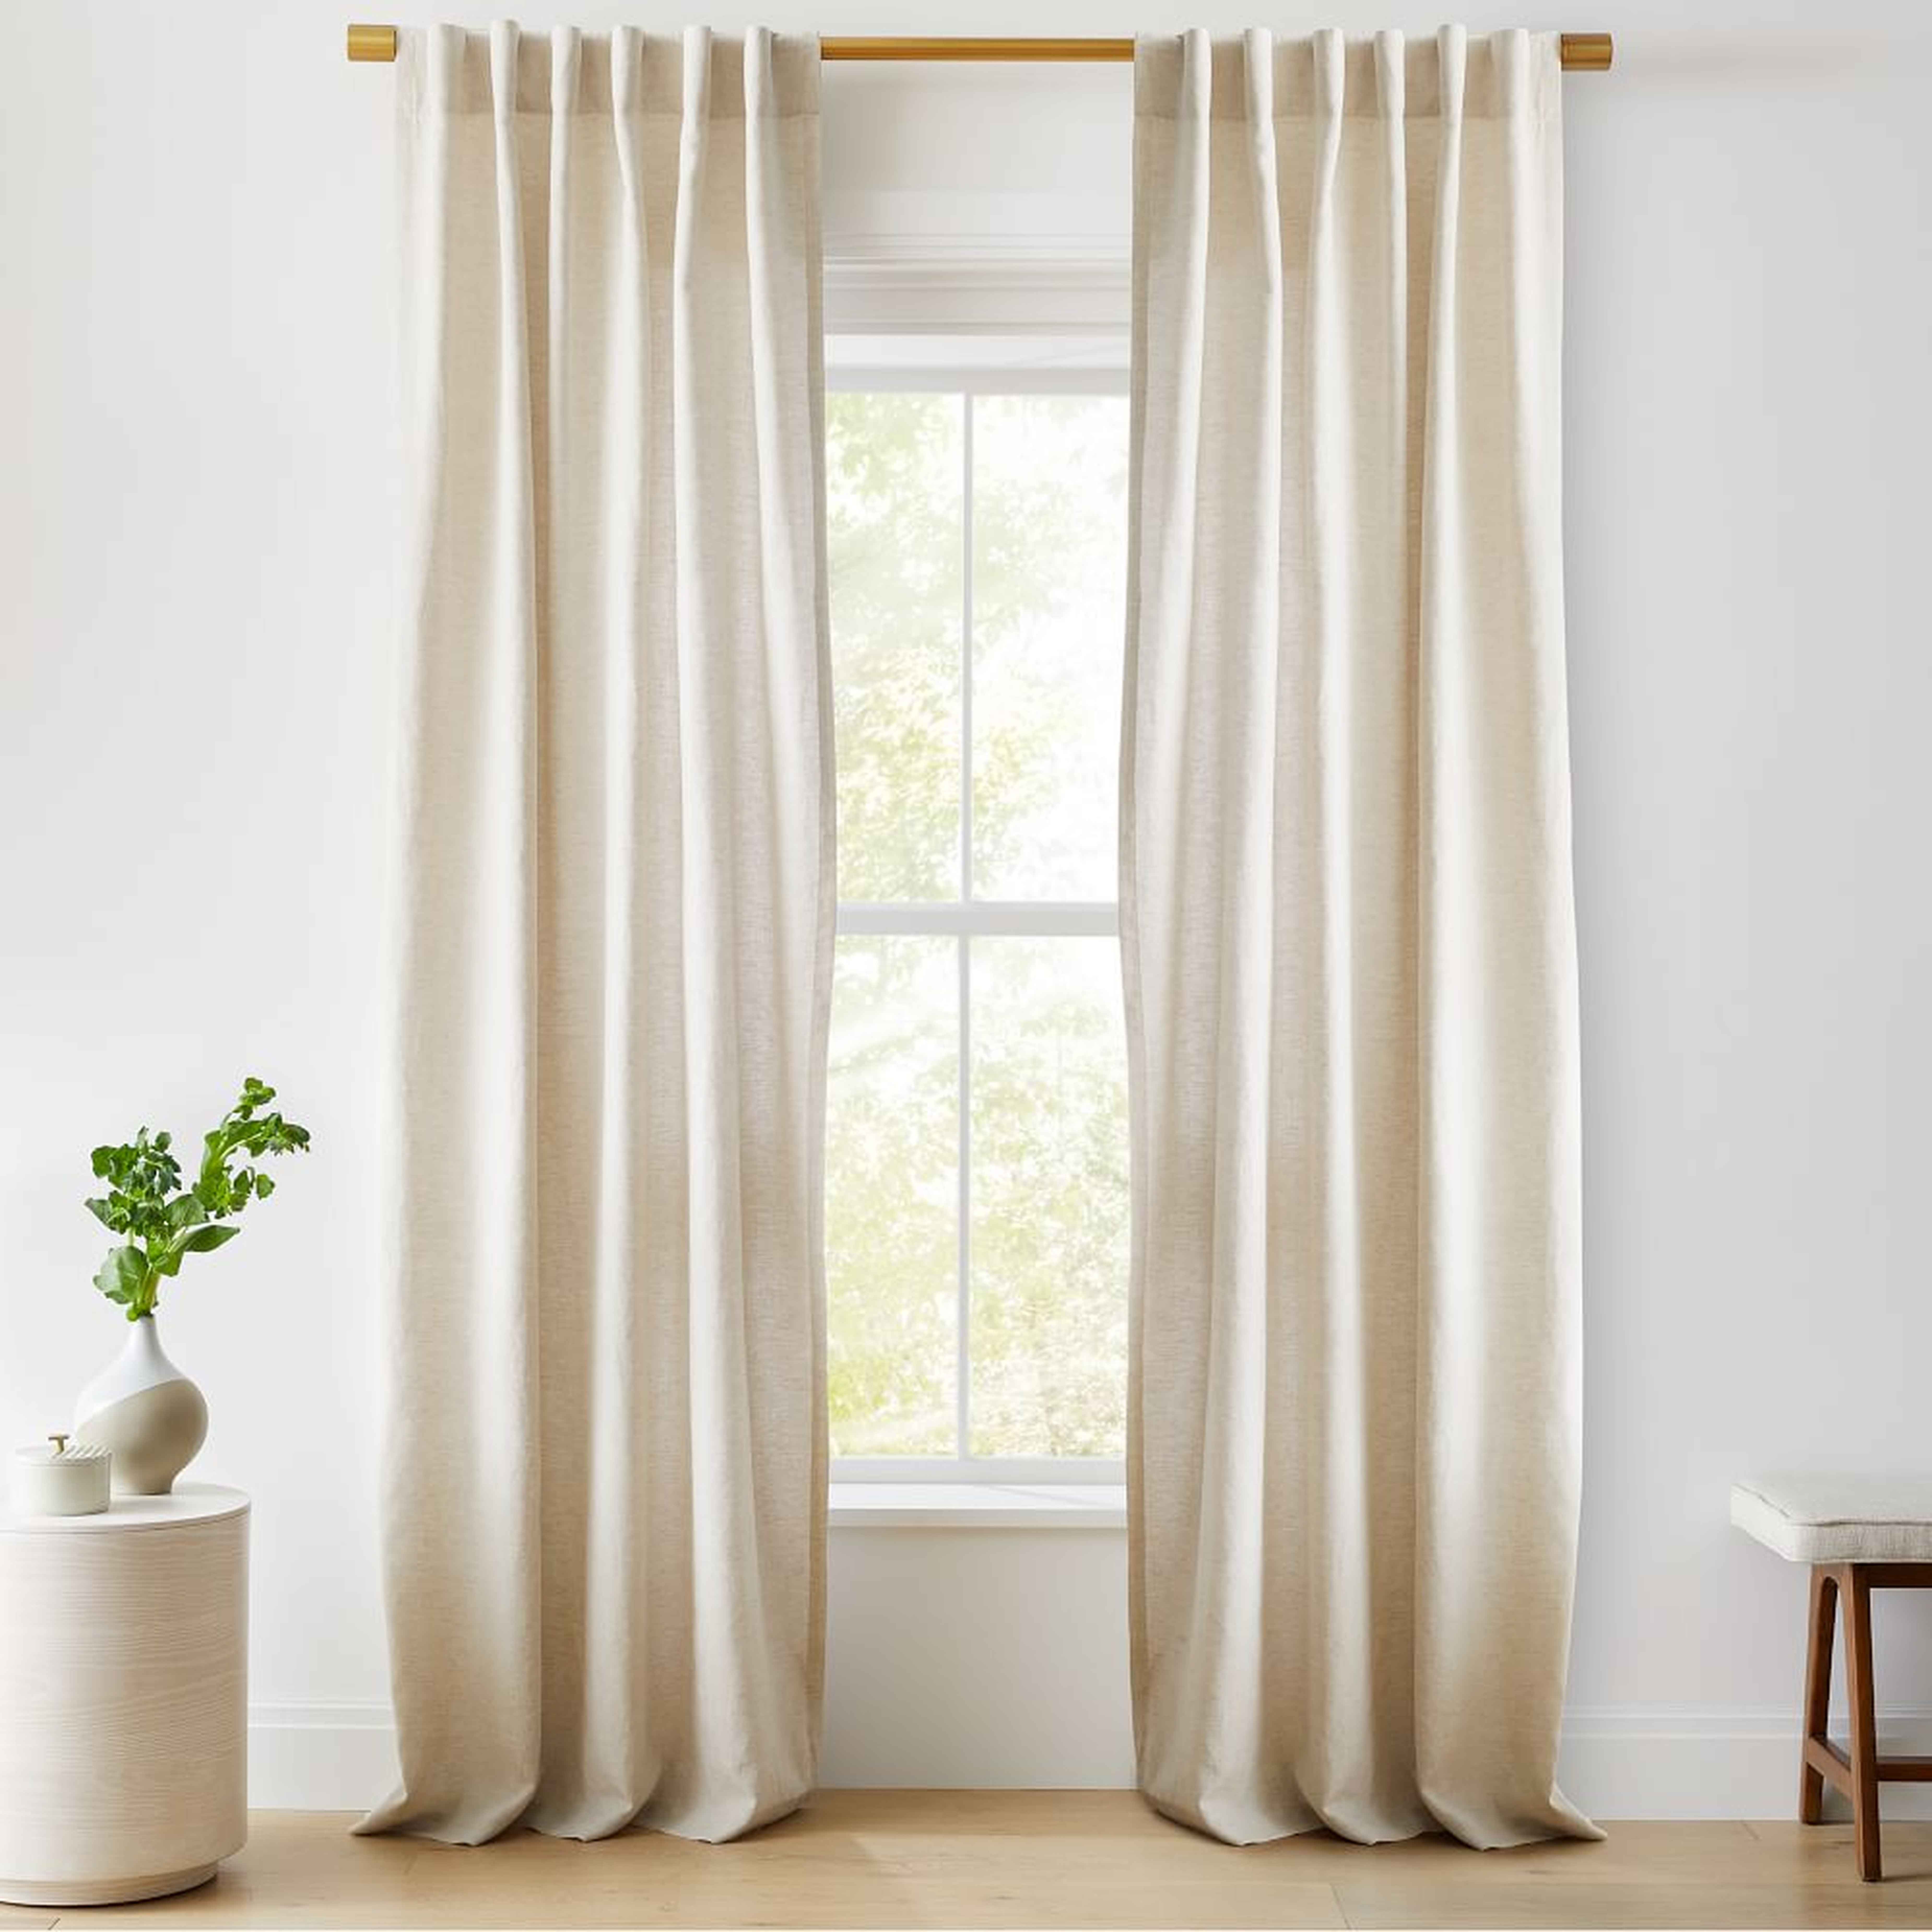 European Flax Linen Curtain with Blackout Liner, 48"x84", Natural Flax - West Elm